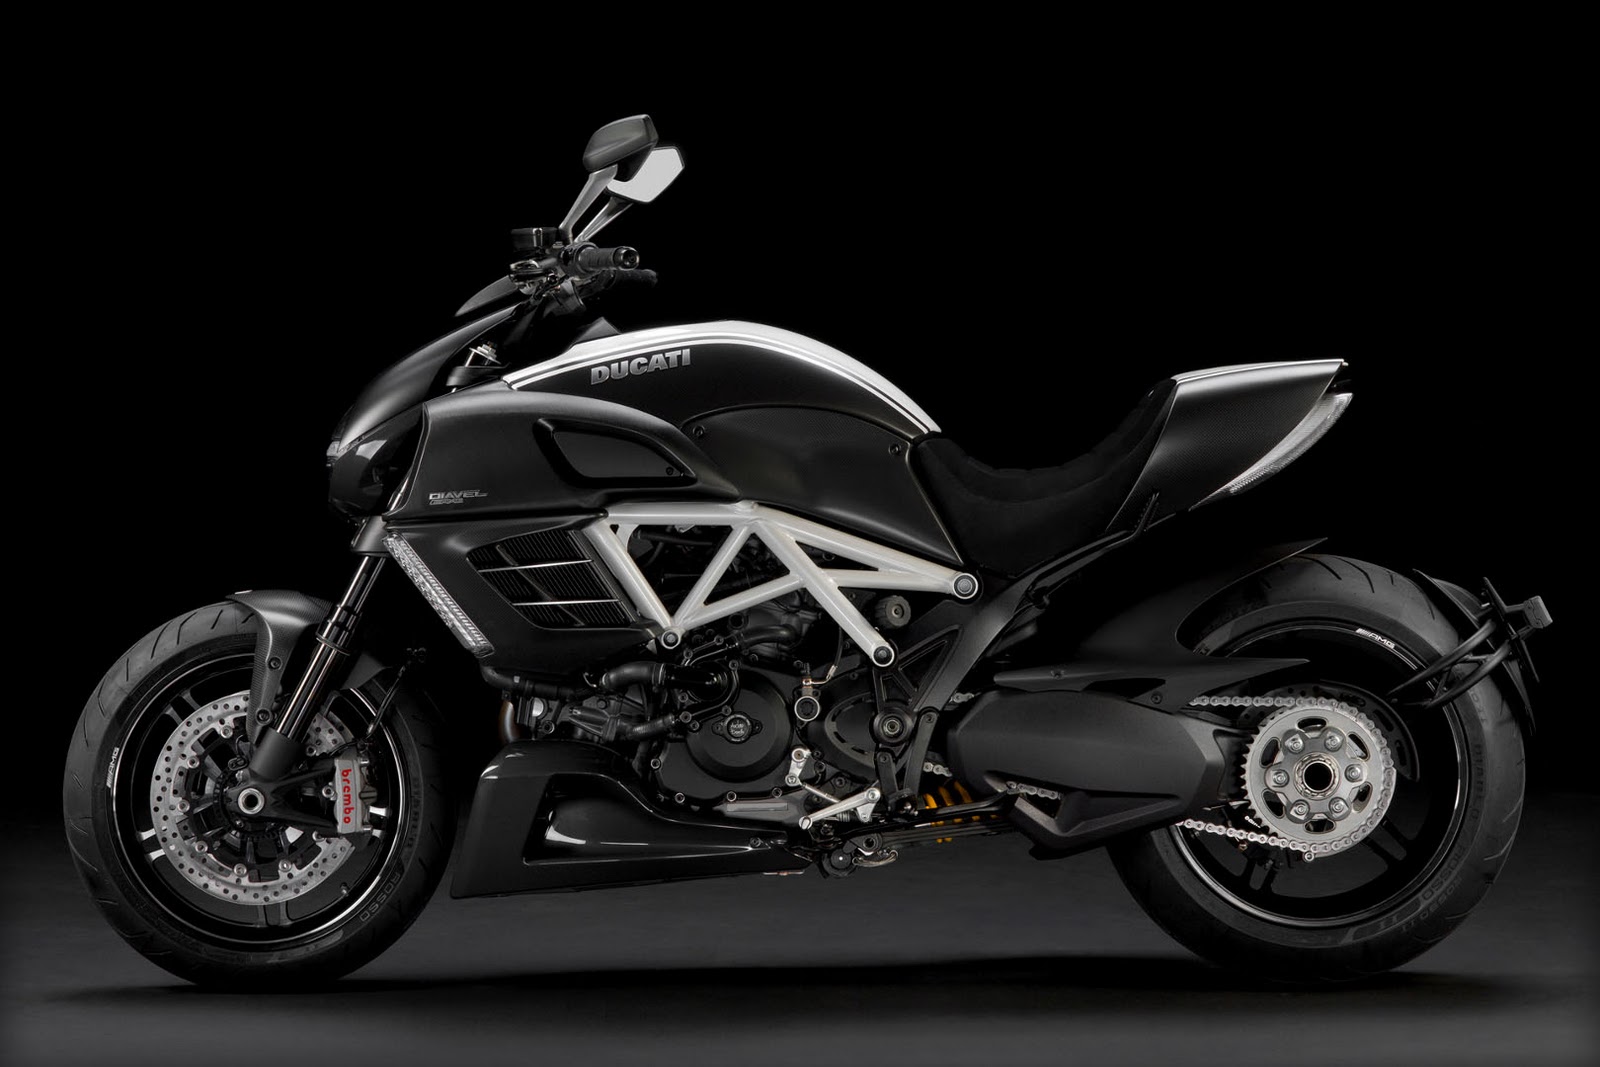 Ducati Diavel AMG Limited Edition Motorcycle Photo Picture Sharing